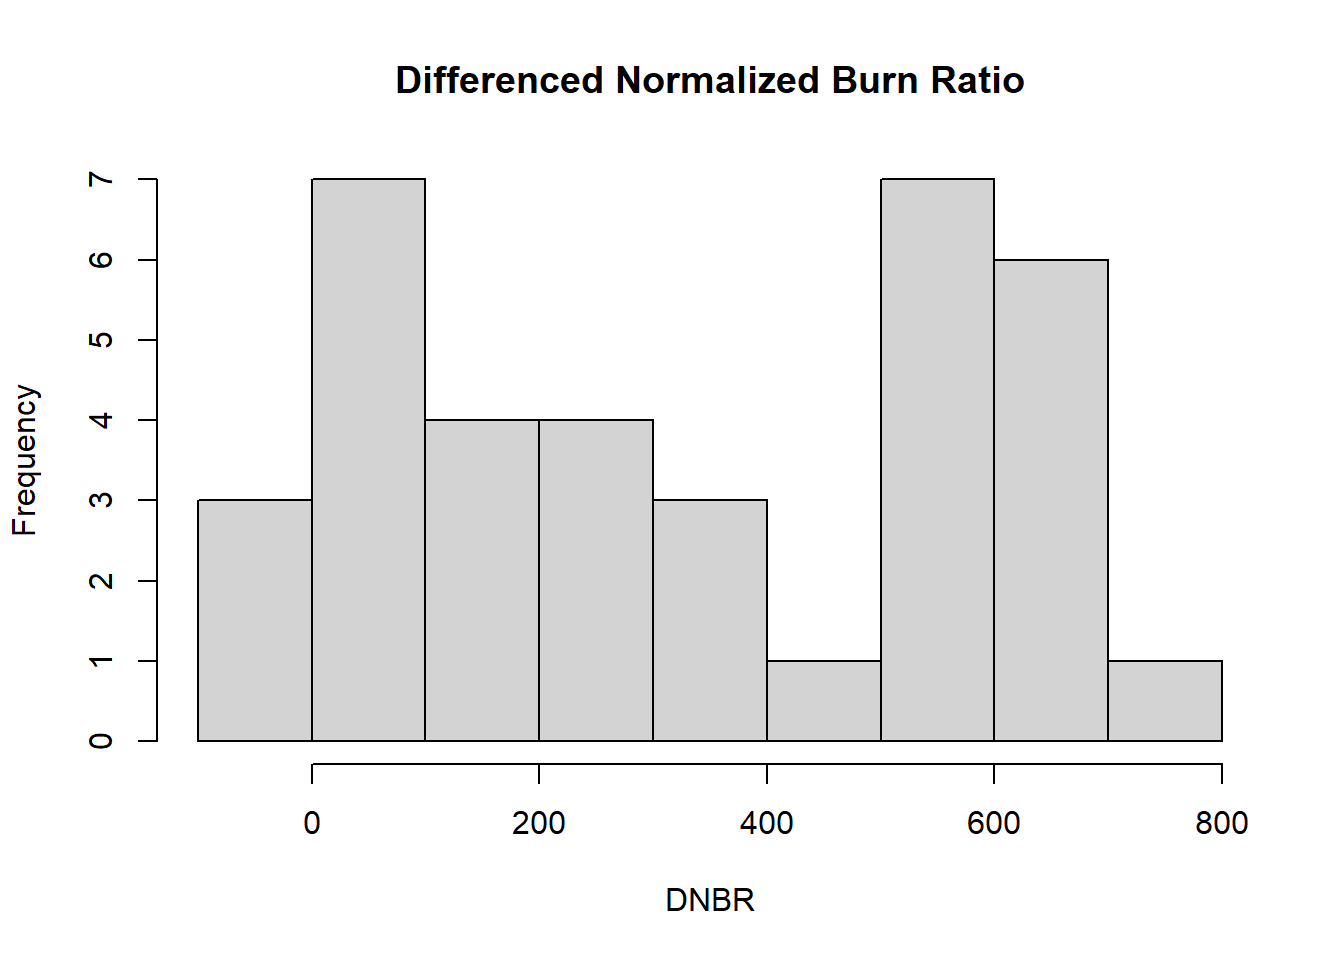 Histogram of the DNBR fire severity index.